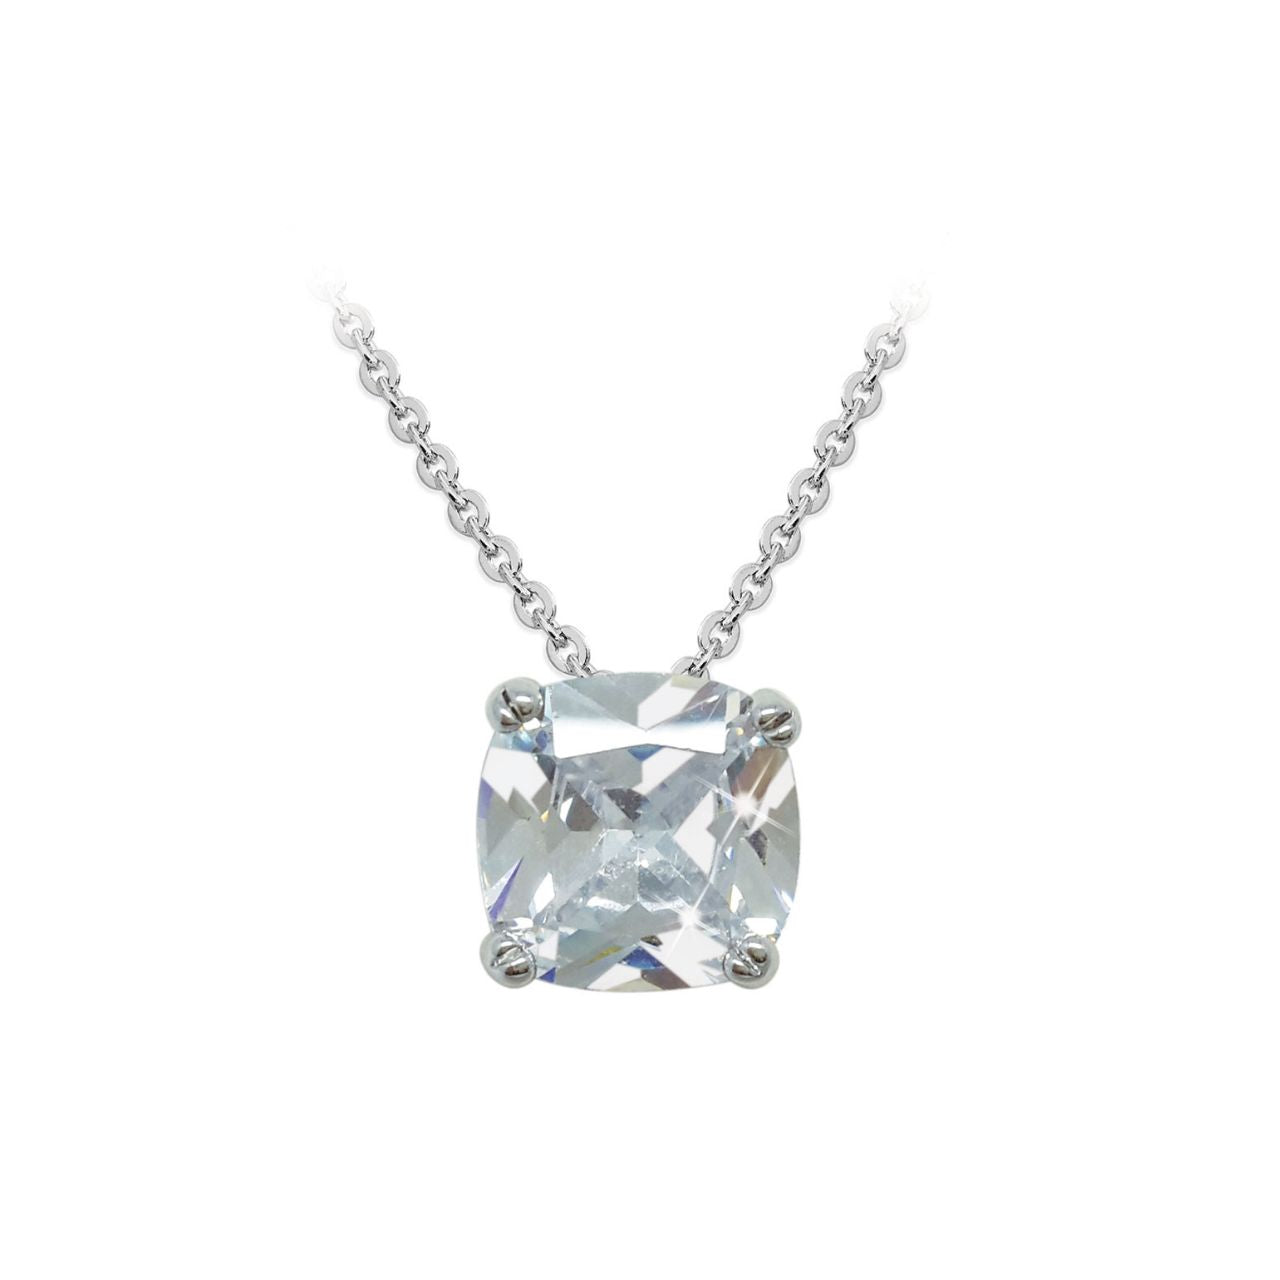 Silver Square Drop Pendant With Clear Stone by Tipperary  Darling and elegant, this simple pendant is truly enchanting. Crafted in cool silver, the sparkling princess-cut solitaire pendant glistens in it’s sleek four prong setting.